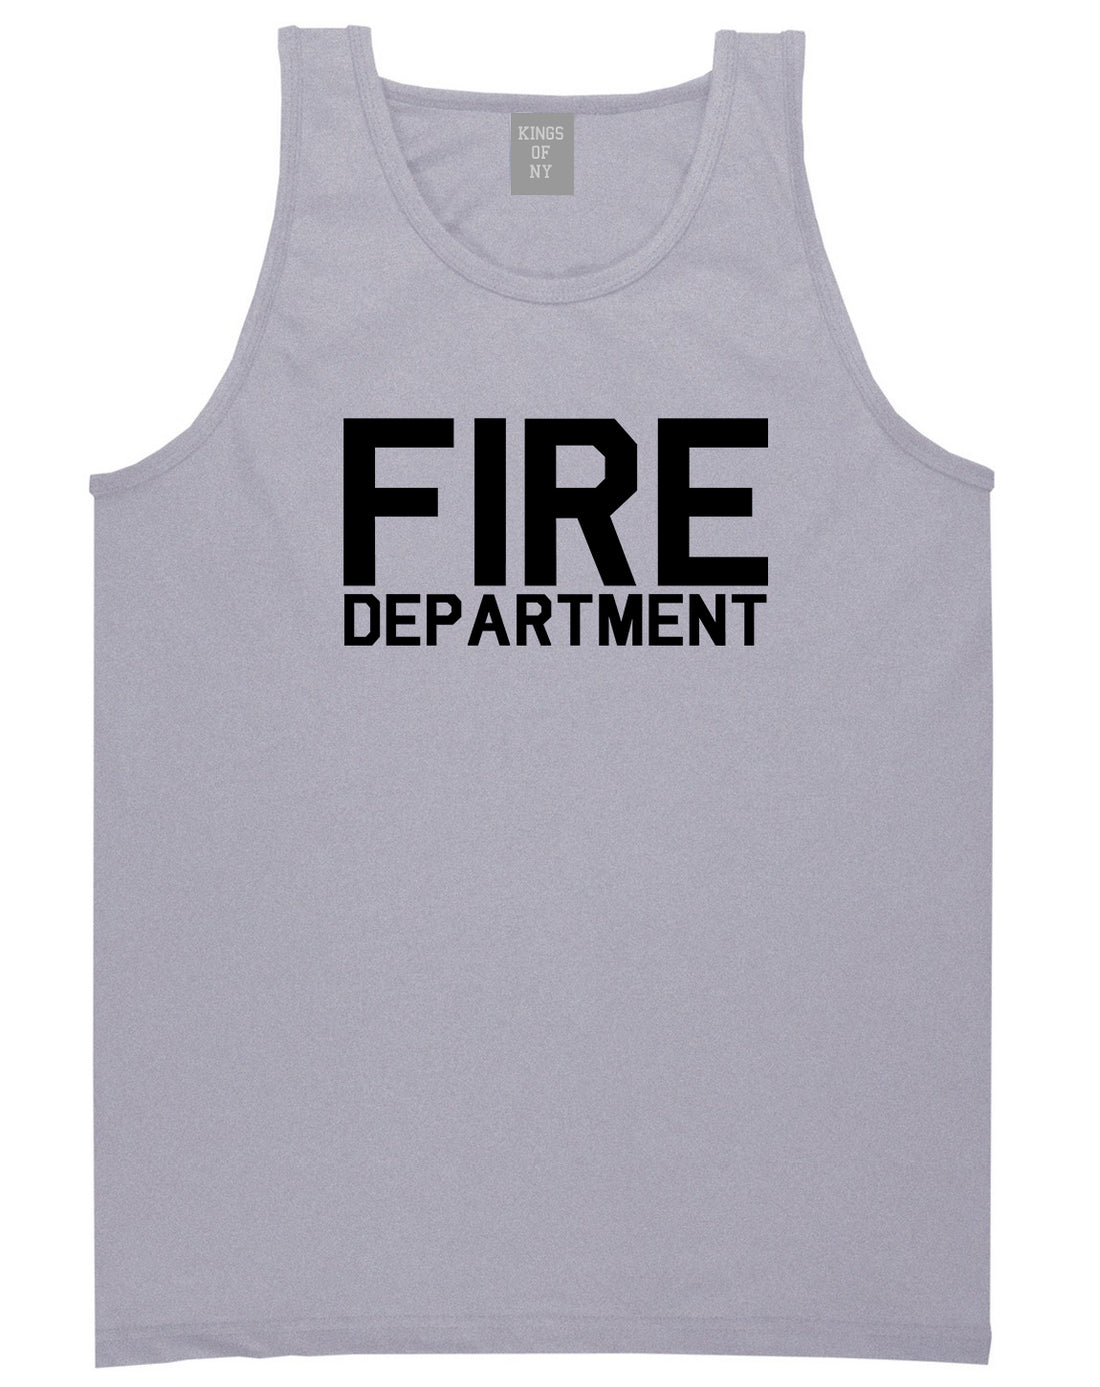 Fire Department Dept Mens Grey Tank Top Shirt by KINGS OF NY